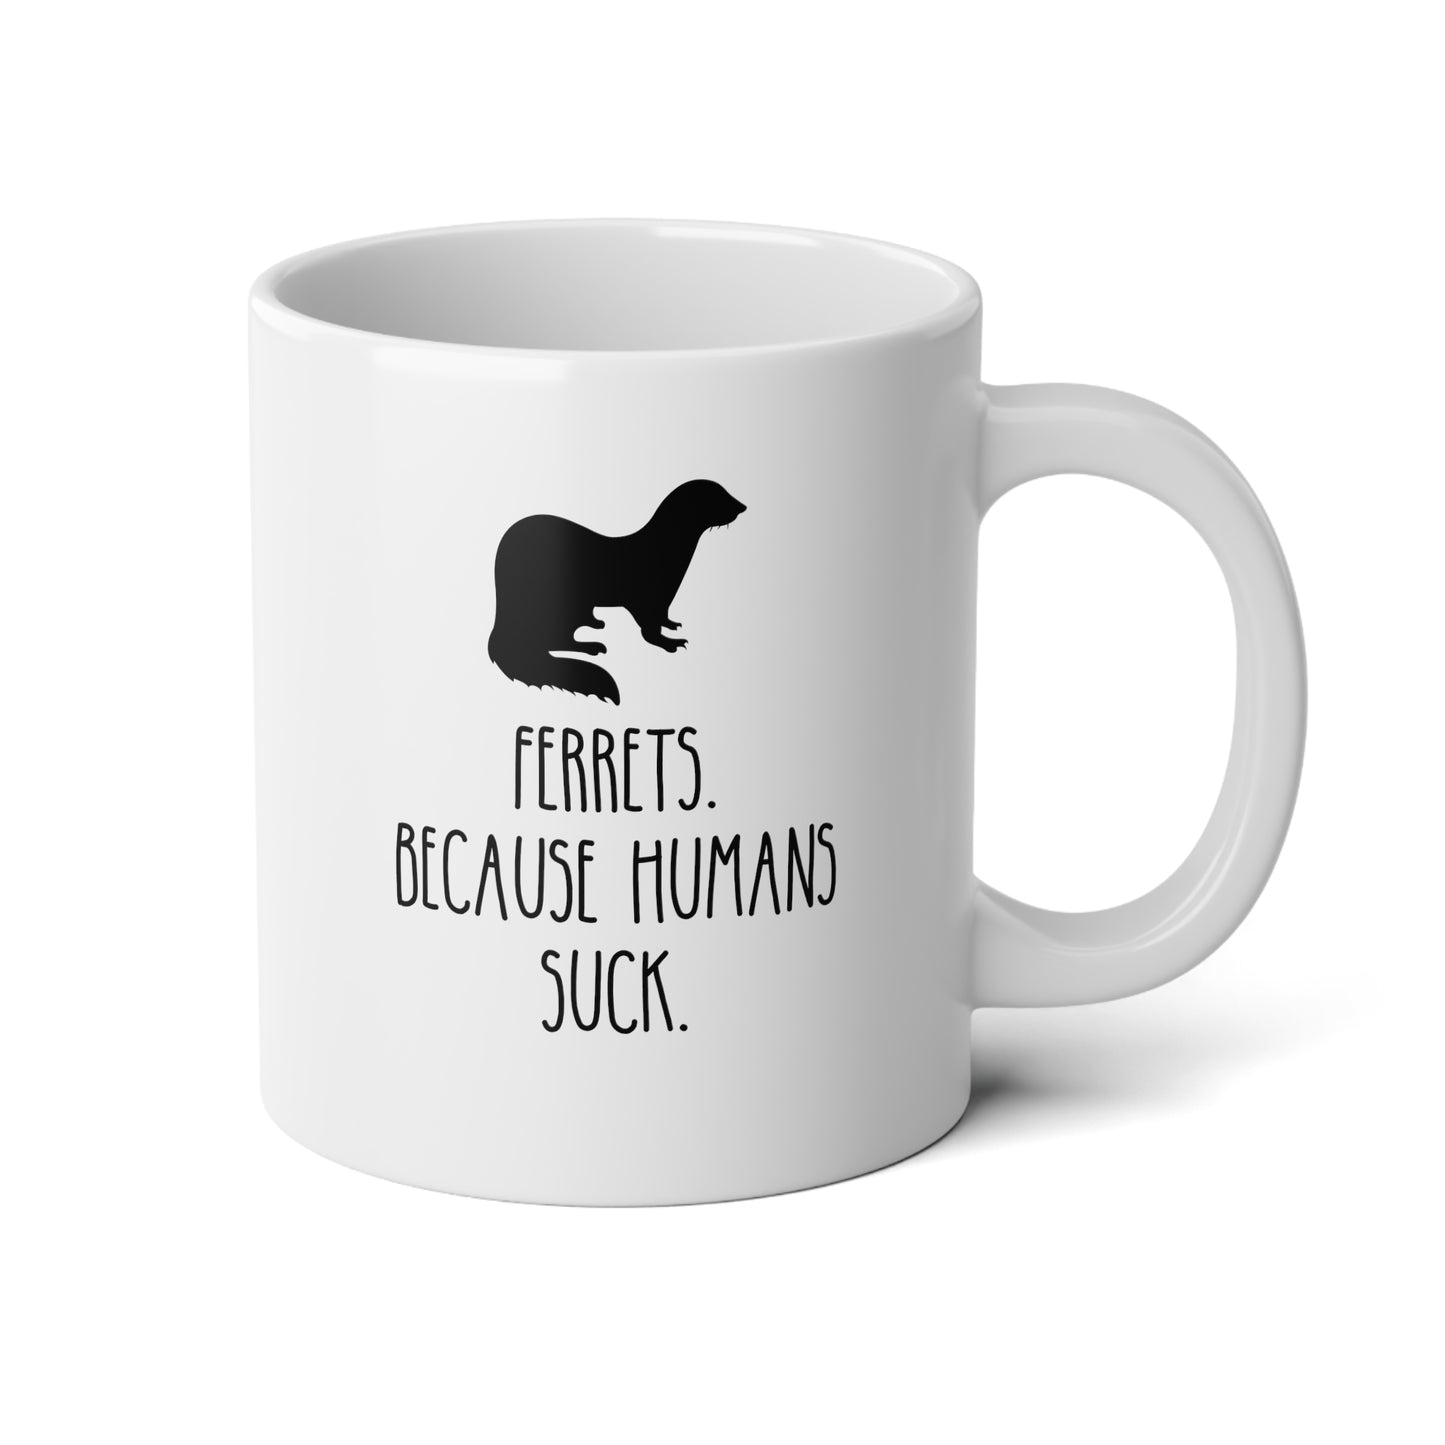 Ferrets Because Humans Suck 20oz white funny large coffee mug gift for dog mom lover owner furmom waveywares wavey wares wavywares wavy wares